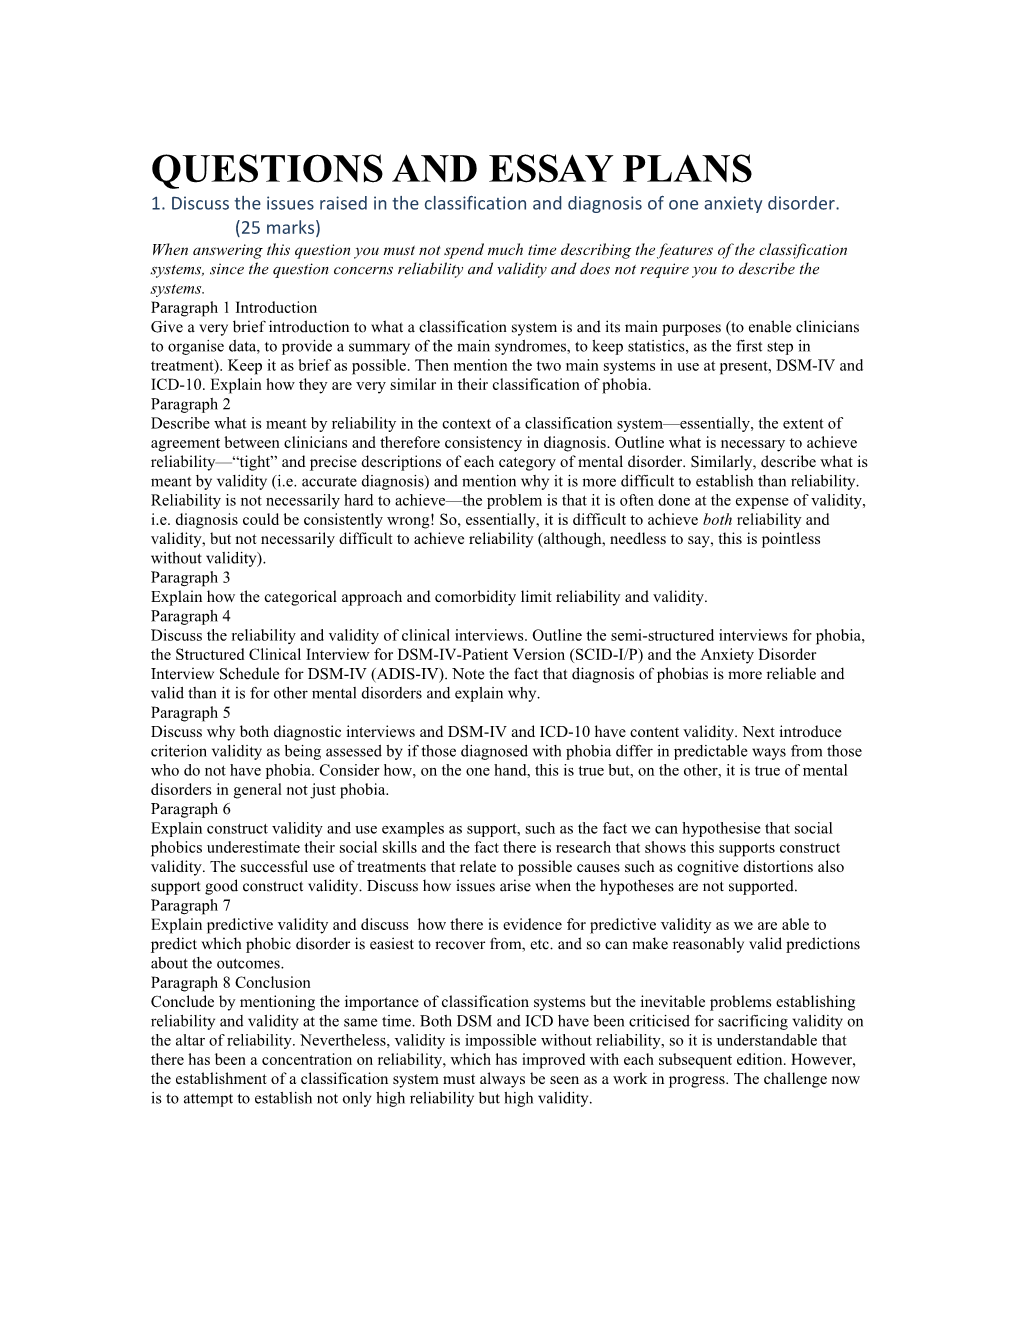 Questions and Essay Plans s1